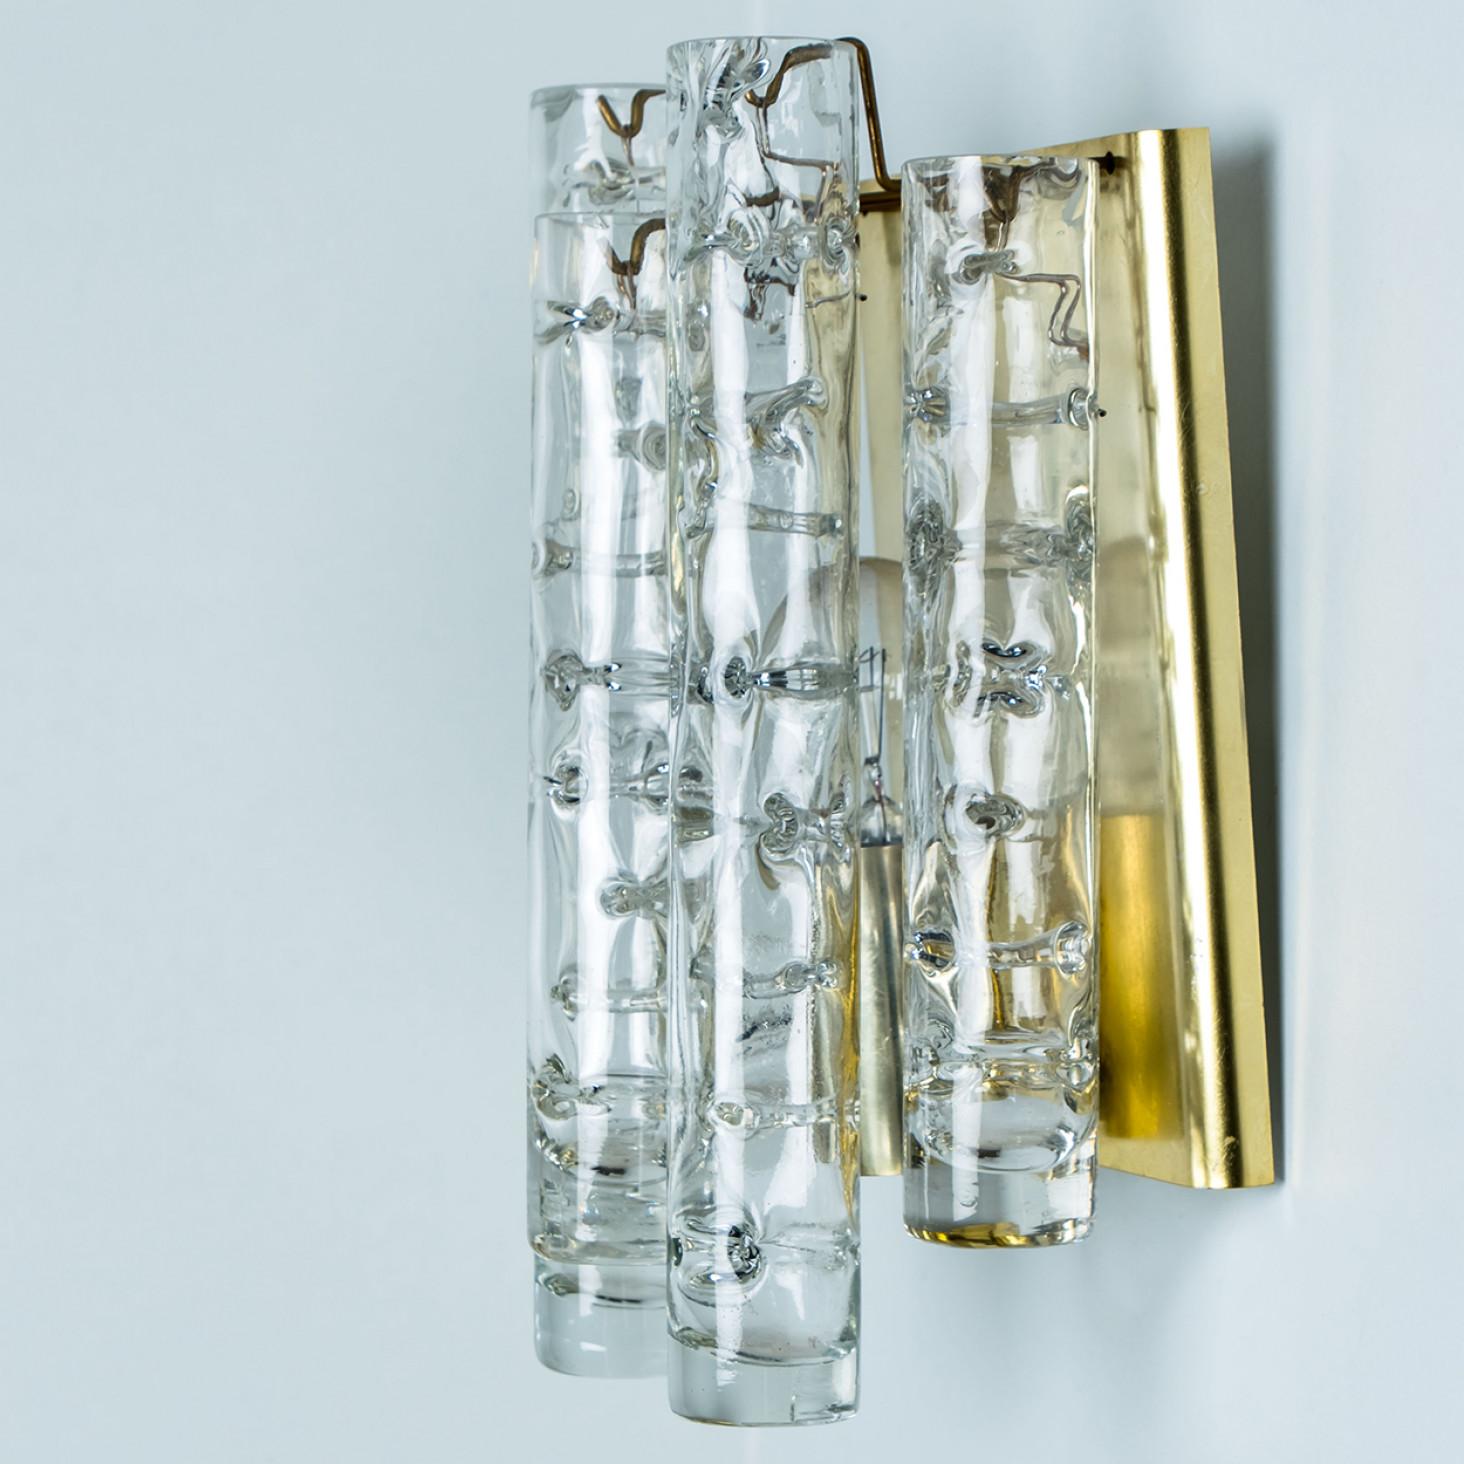 German Pair of Structured Tubes Wall Lights by Doria Leuchten, 1960s For Sale